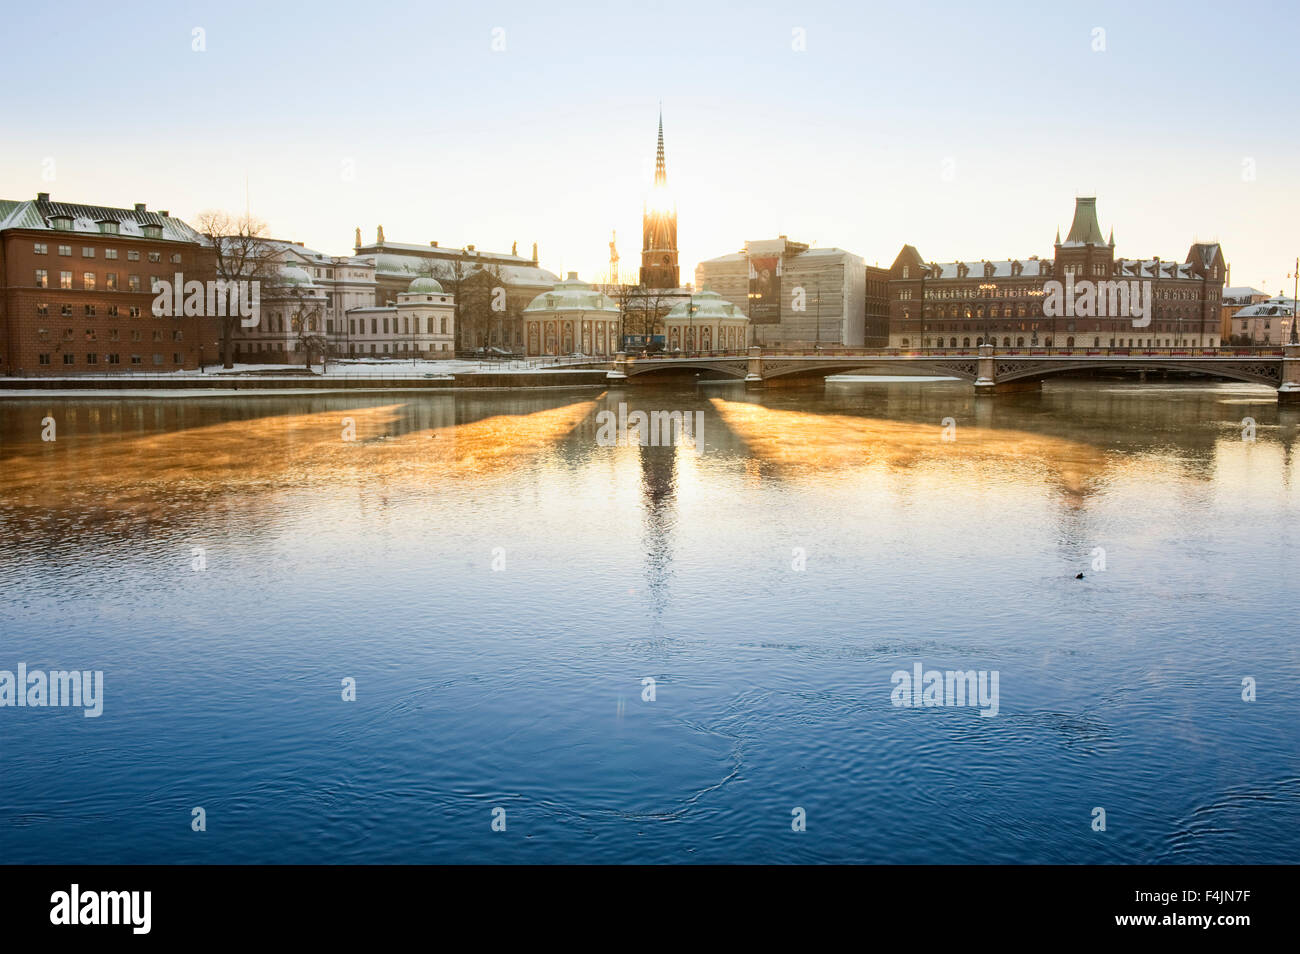 Sweden, Stockholm, view of Riddarholmskyrkan District over canal Stock Photo